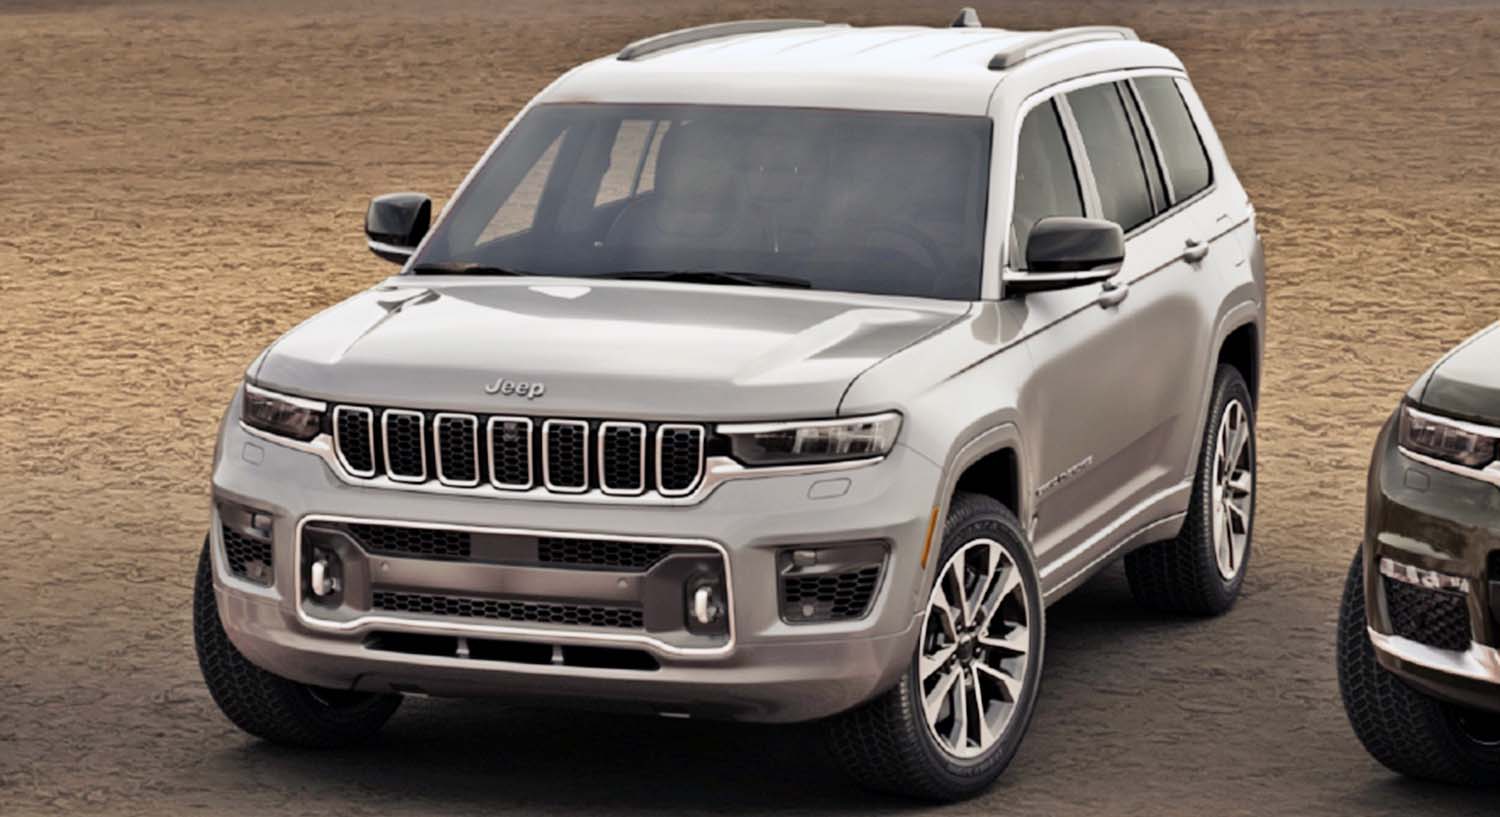 All-New Jeep Grand Cherokee L Breaks New Ground In The Full-Size SUV Segment In The Middle East